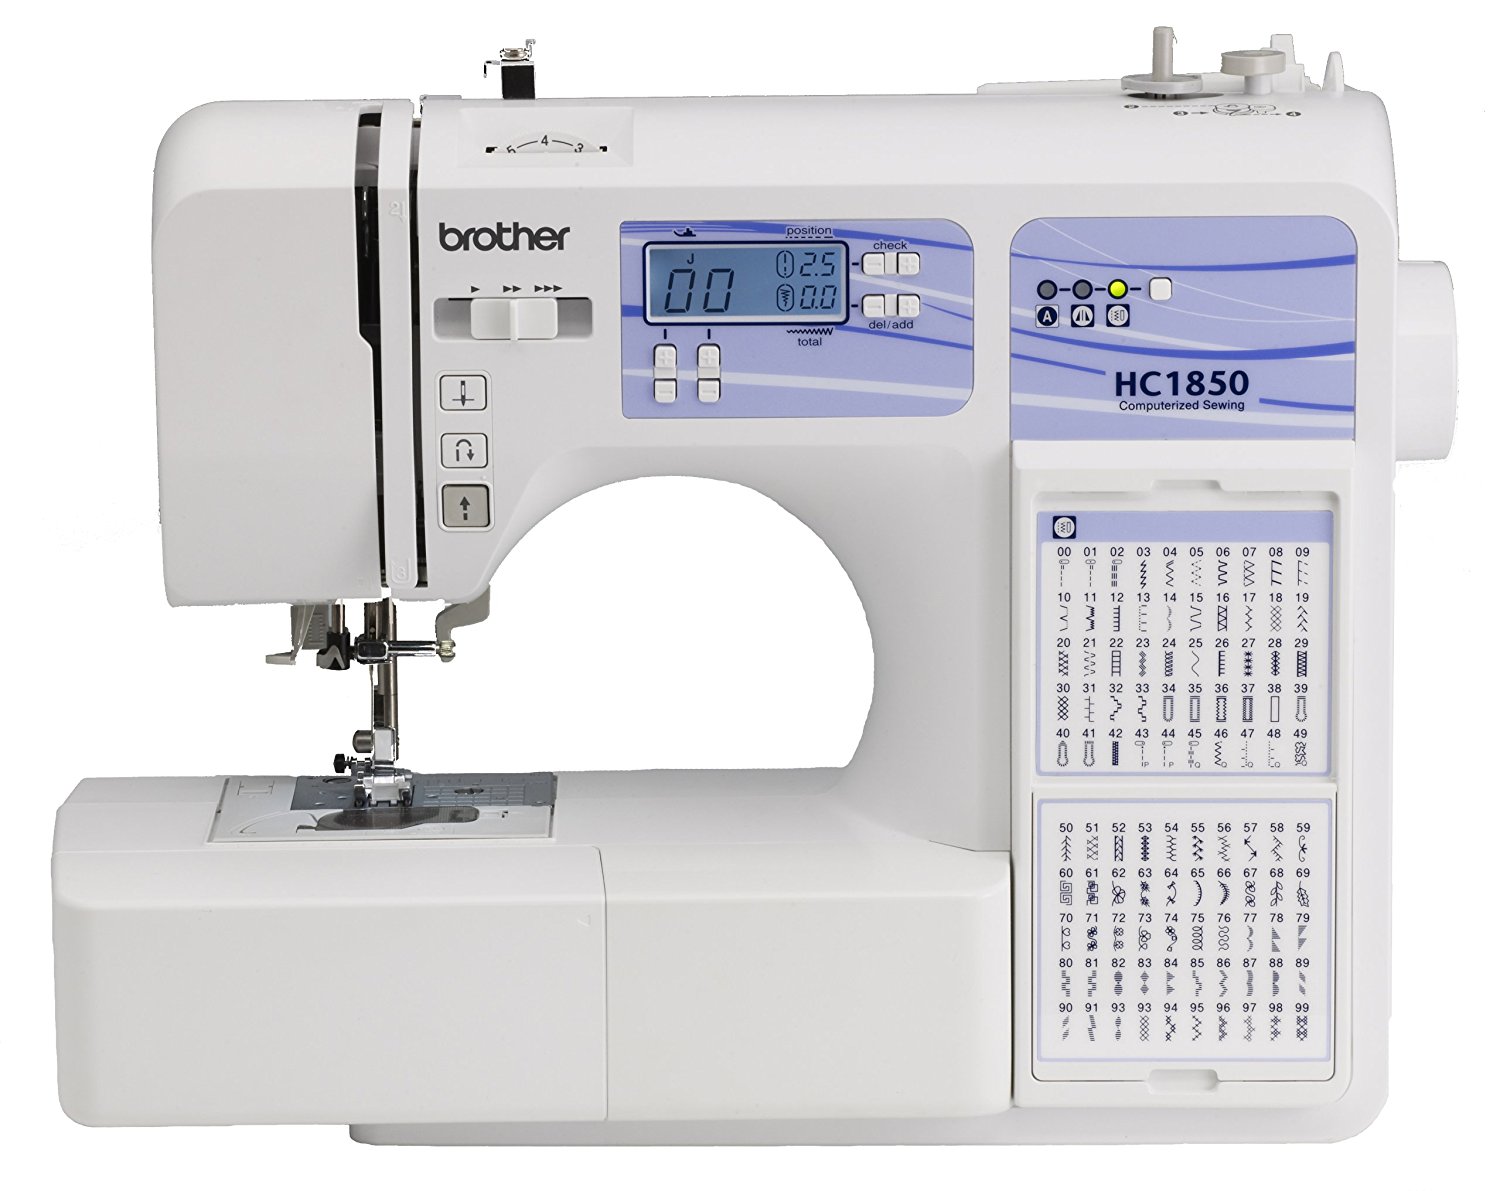 Best Brother Sewing & Embroidery Machine Review: Are you a quilter? You already know what Brother has for you!